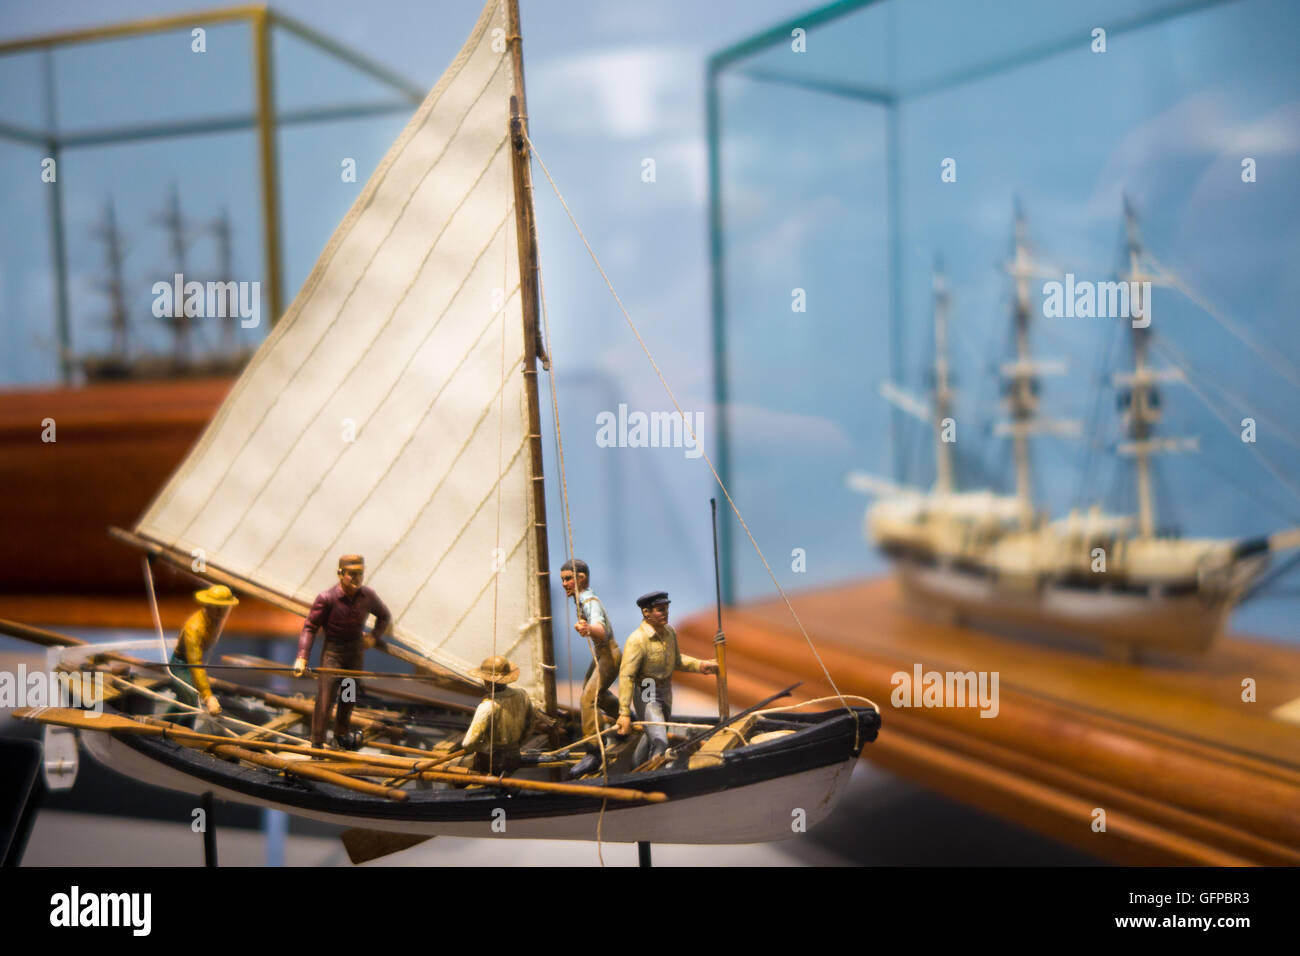 Miniature whaling ships on display at the 'Voyaging in the Wake of the Whalers' exhibit at the Mystic Seaport, Mystic, Connecticut, USA Stock Photo